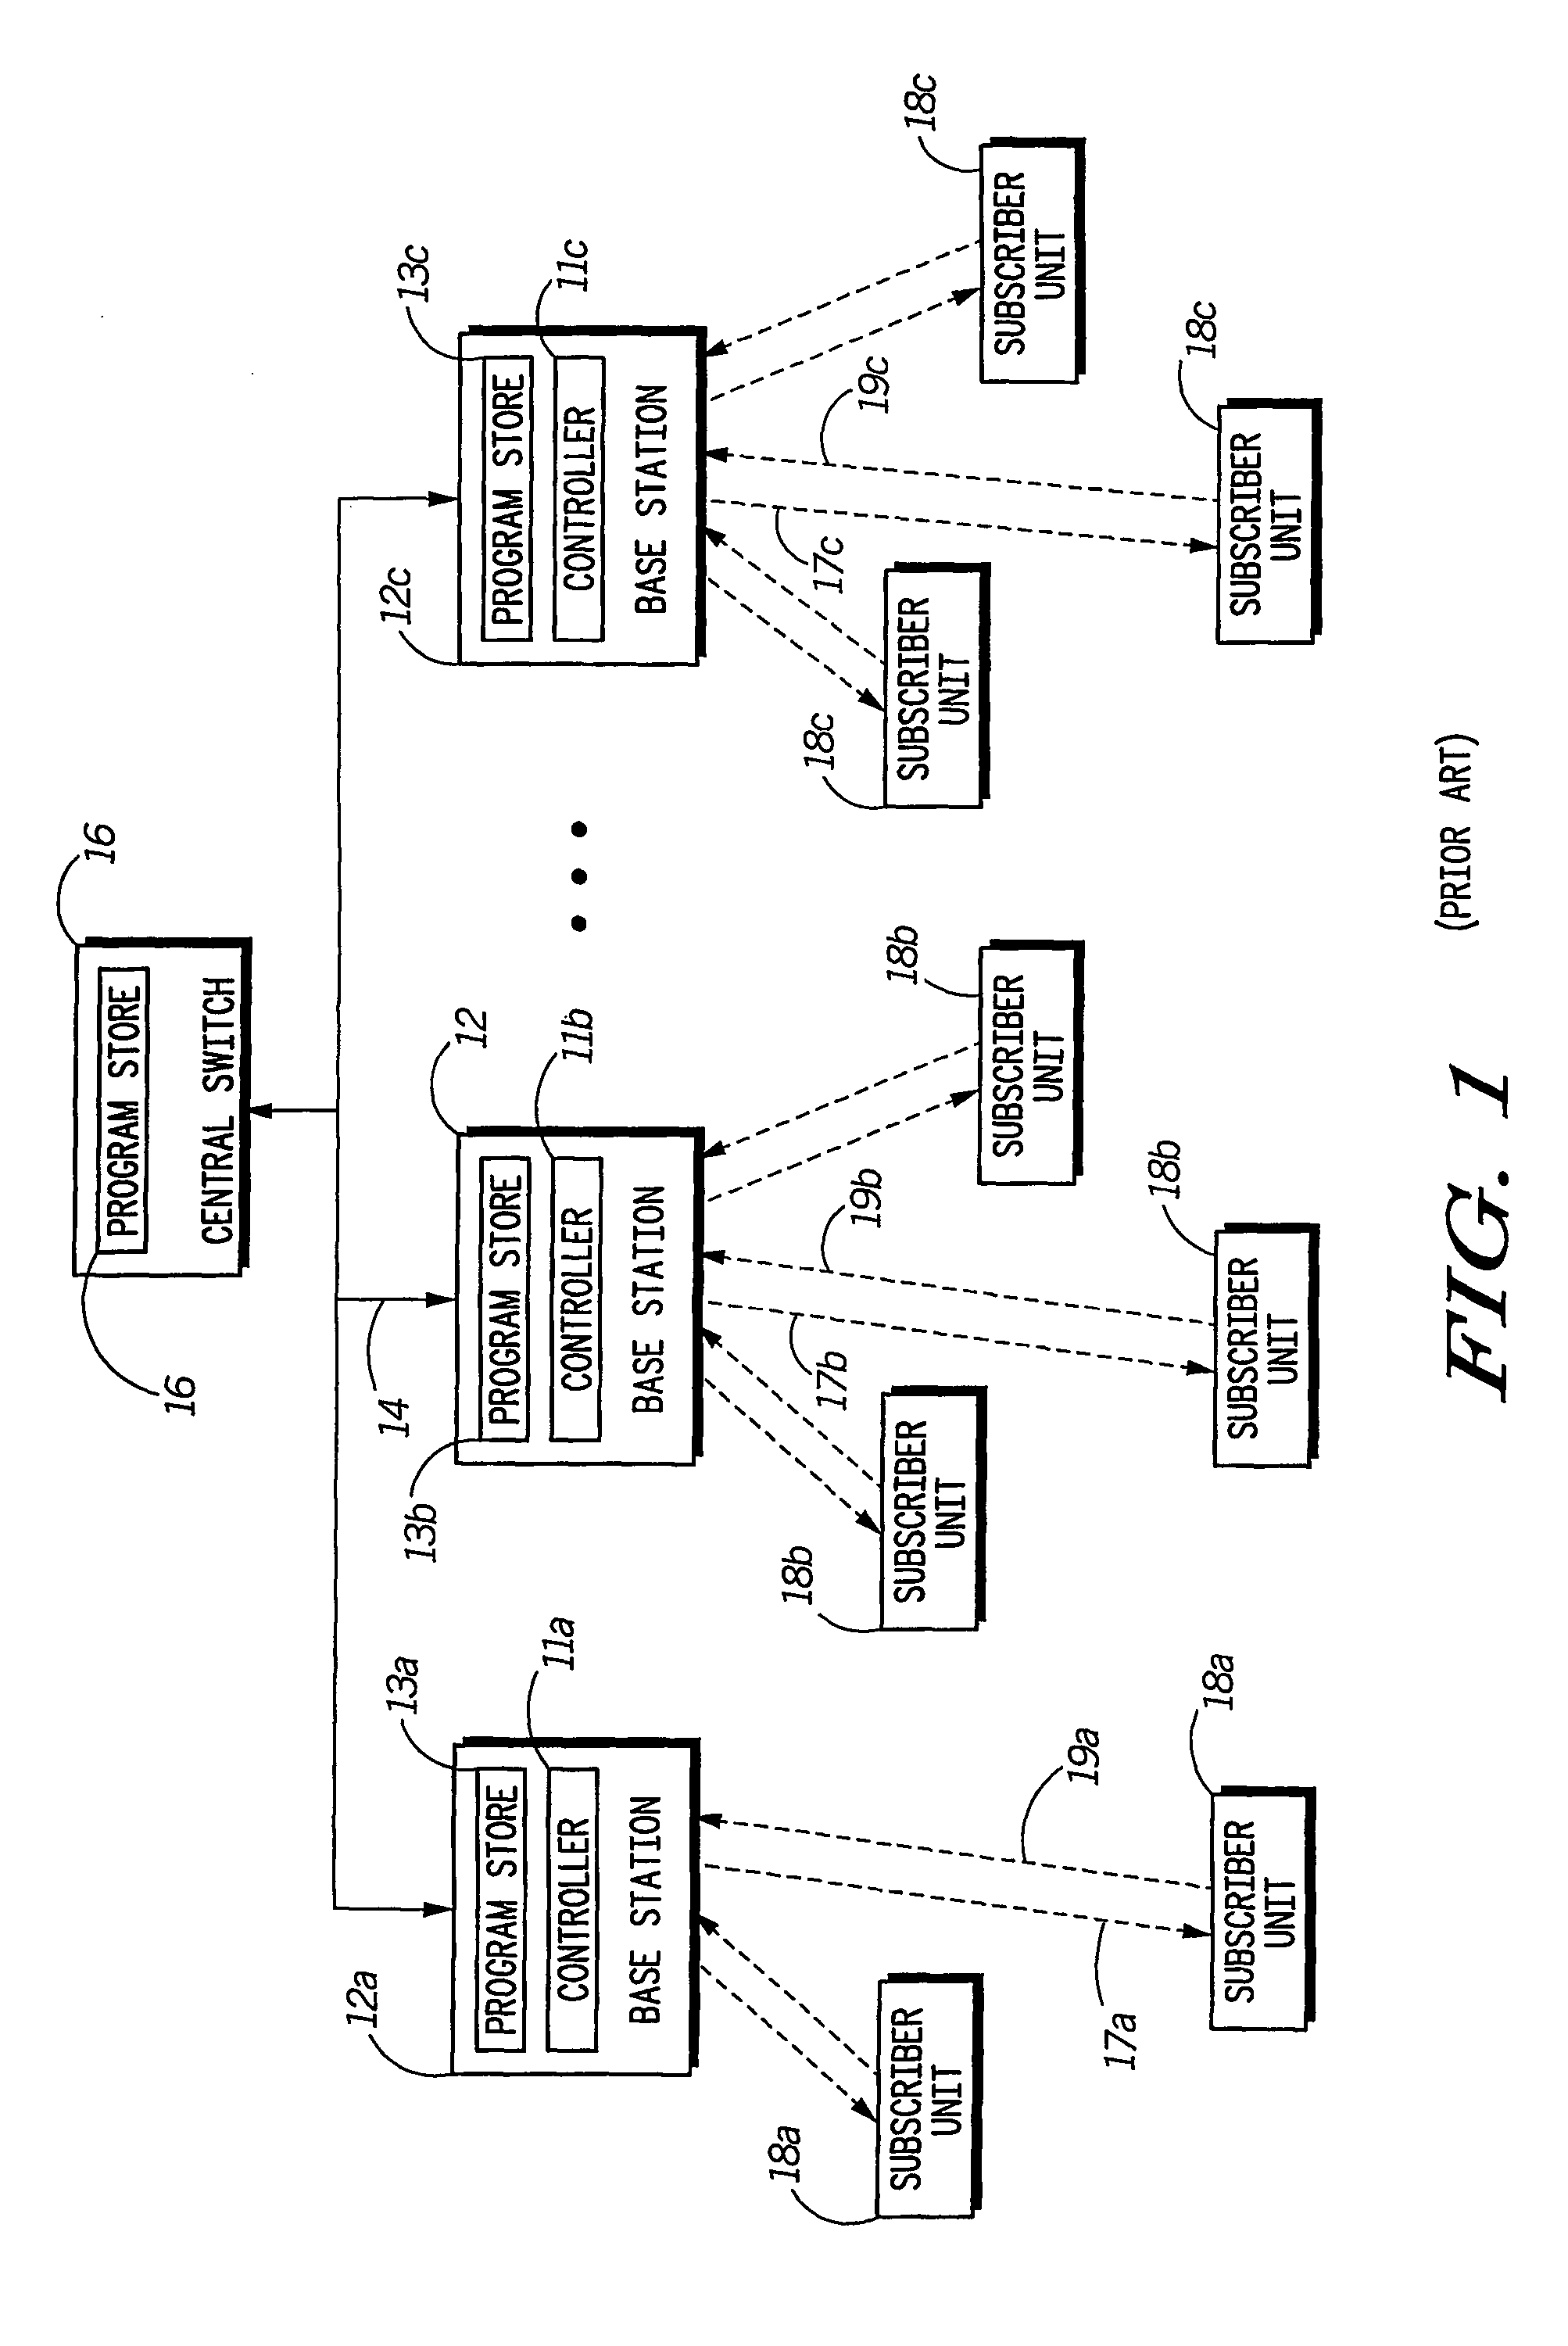 Cellular radio communication systems and methods and equipment for use therein